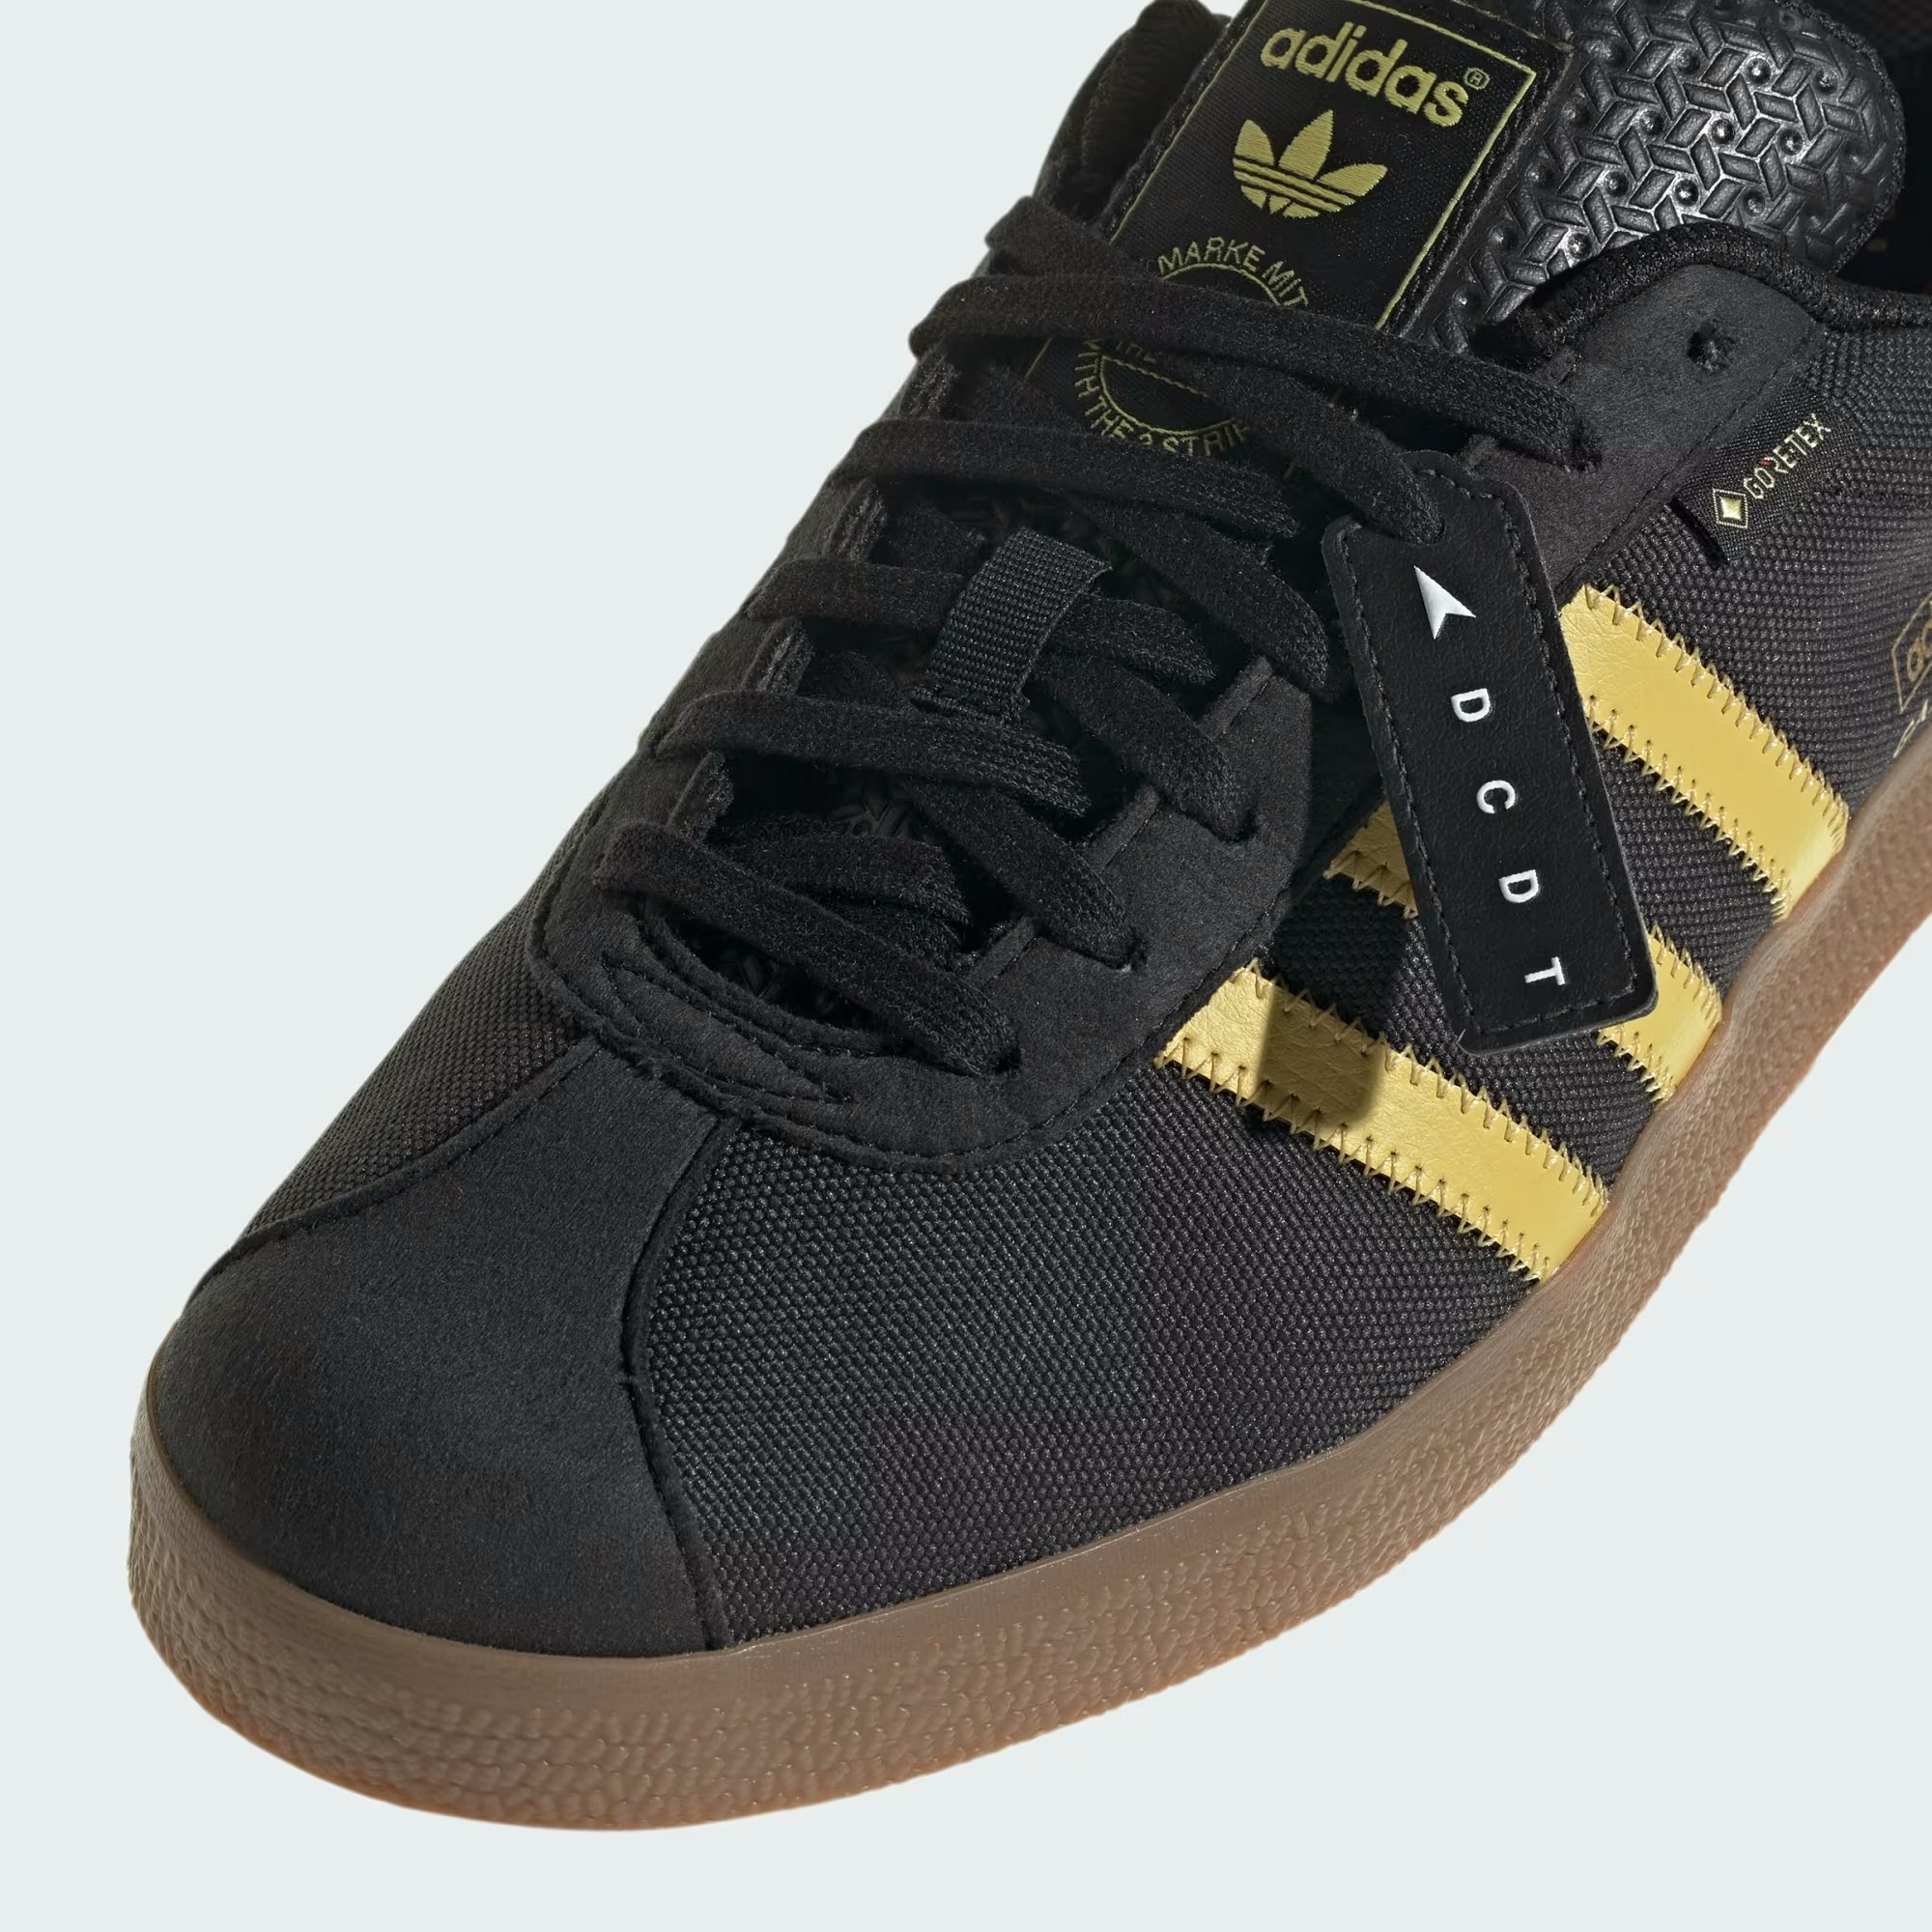 DCDT x adidas Gazelle GORE-TEX "Give Life Meaning"